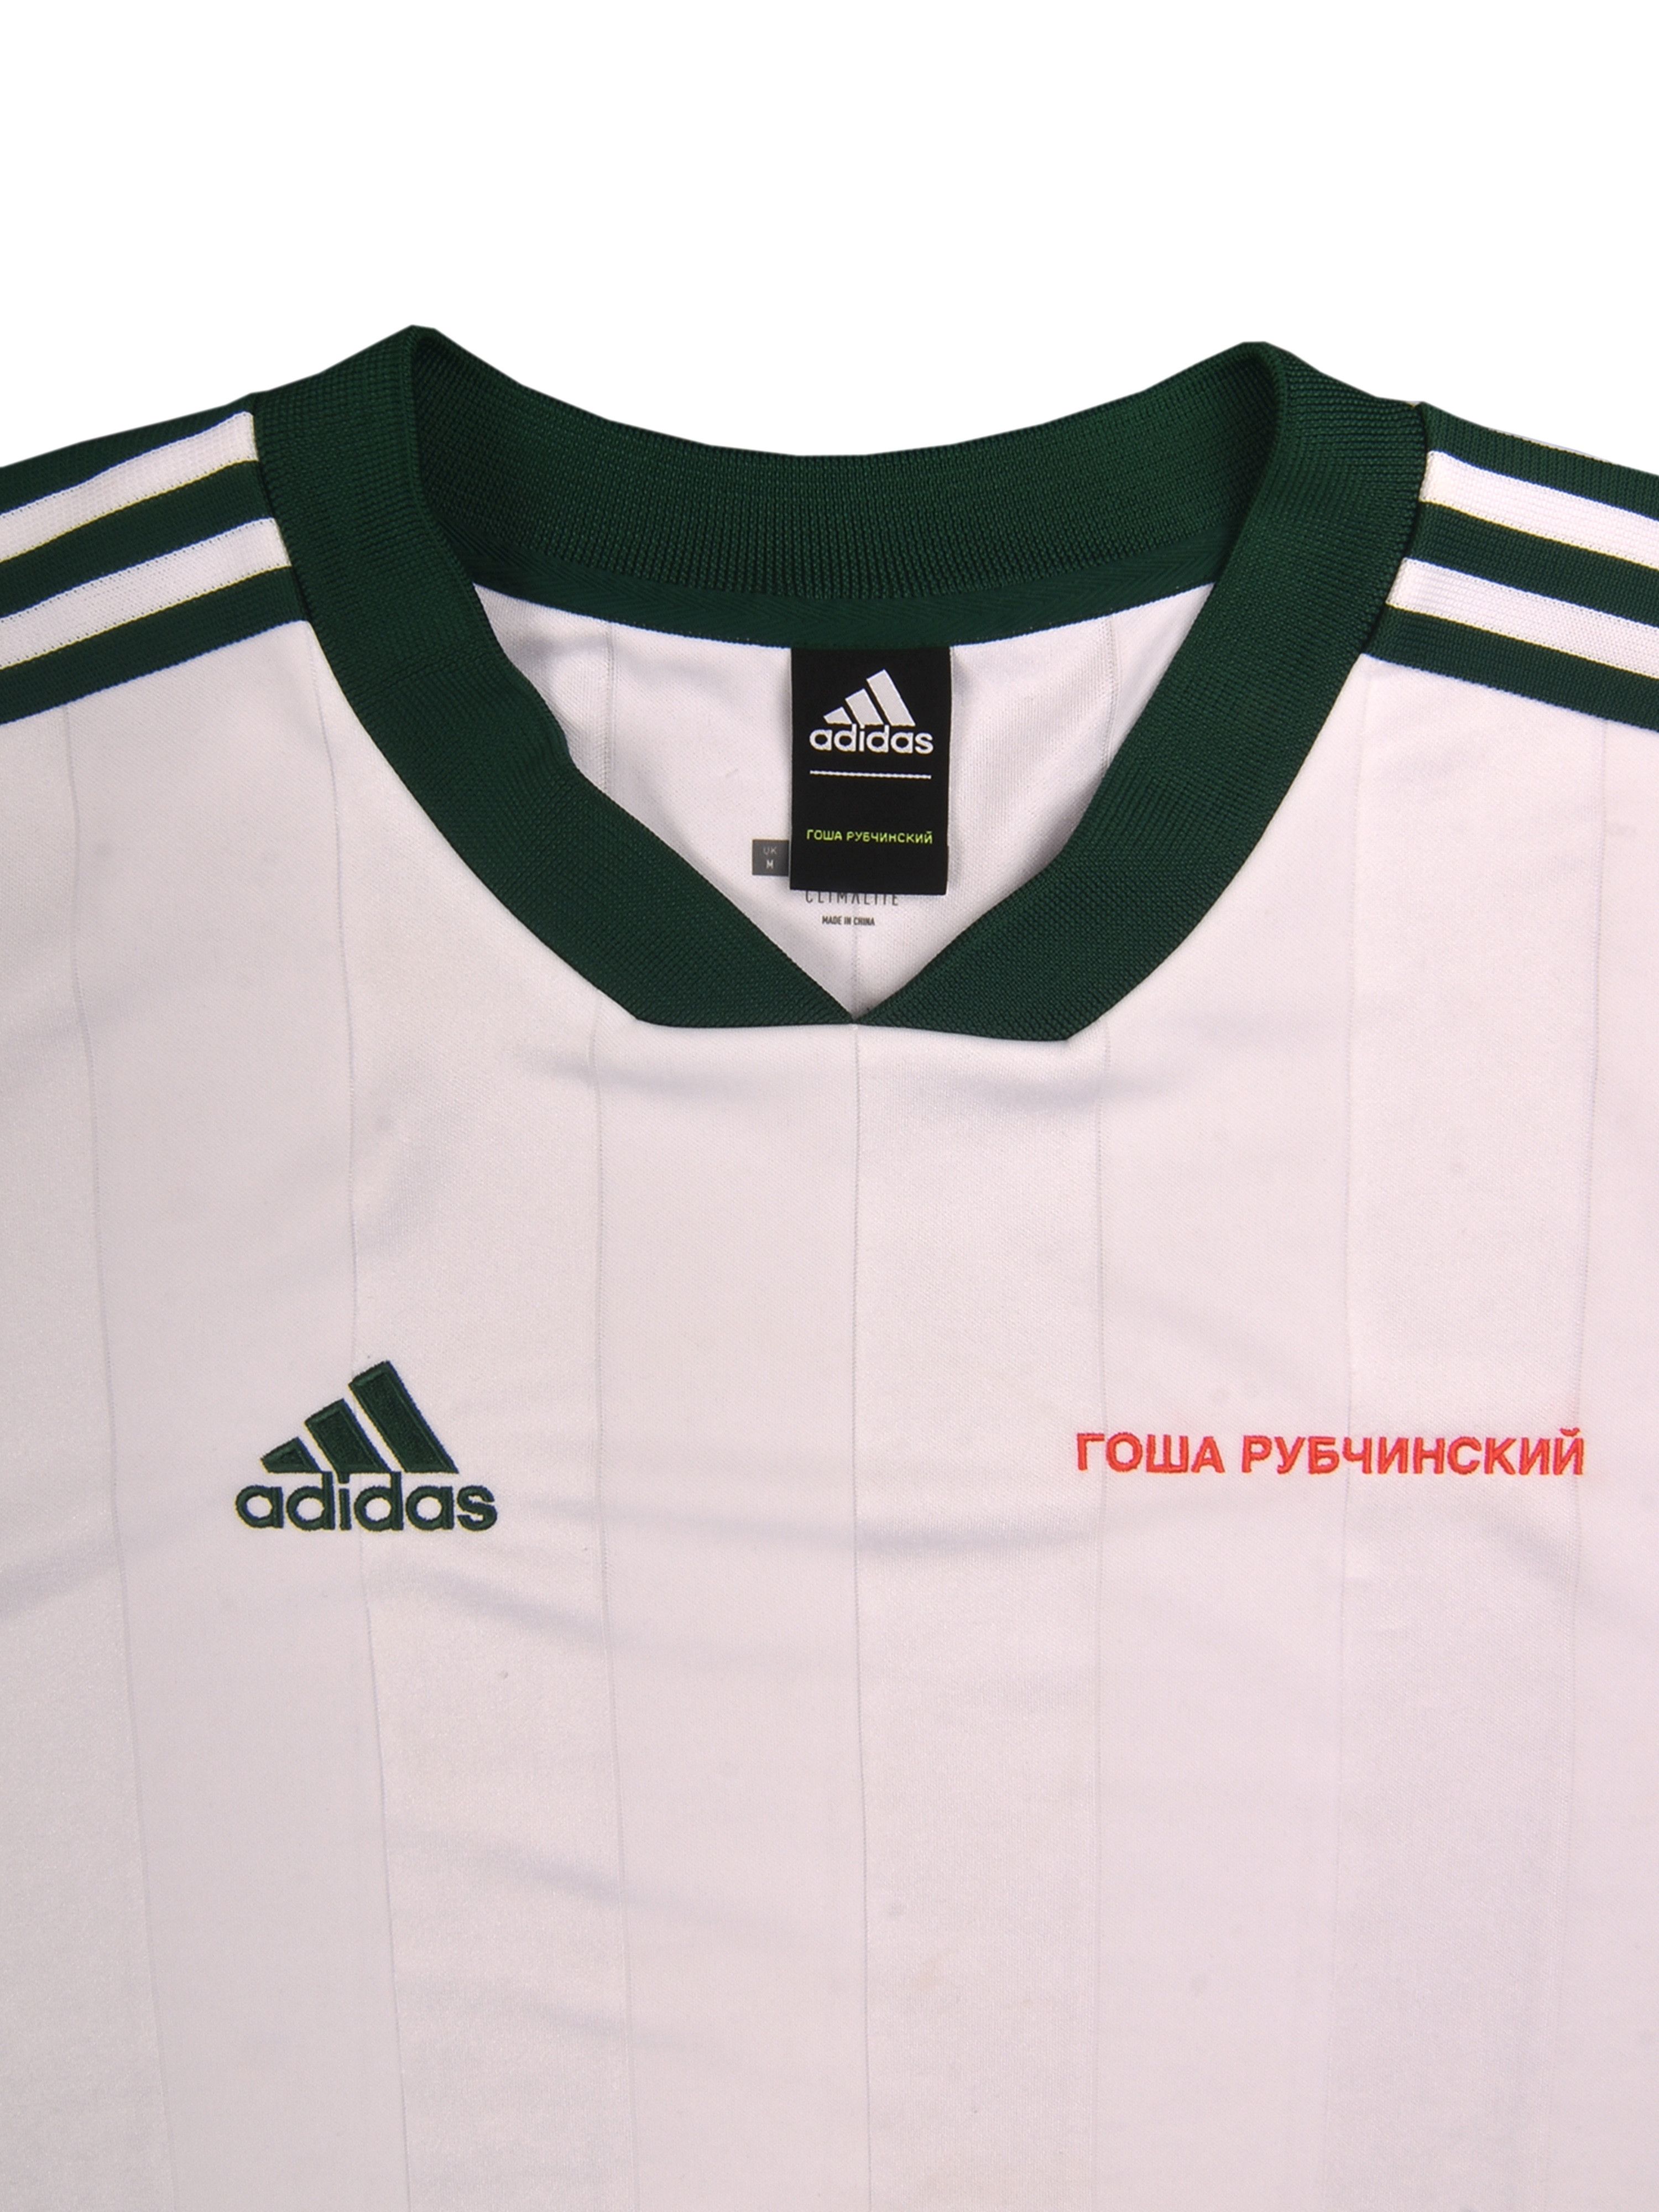 Adidas Soccer Jersey Size US M / EU 48-50 / 2 - 2 Preview